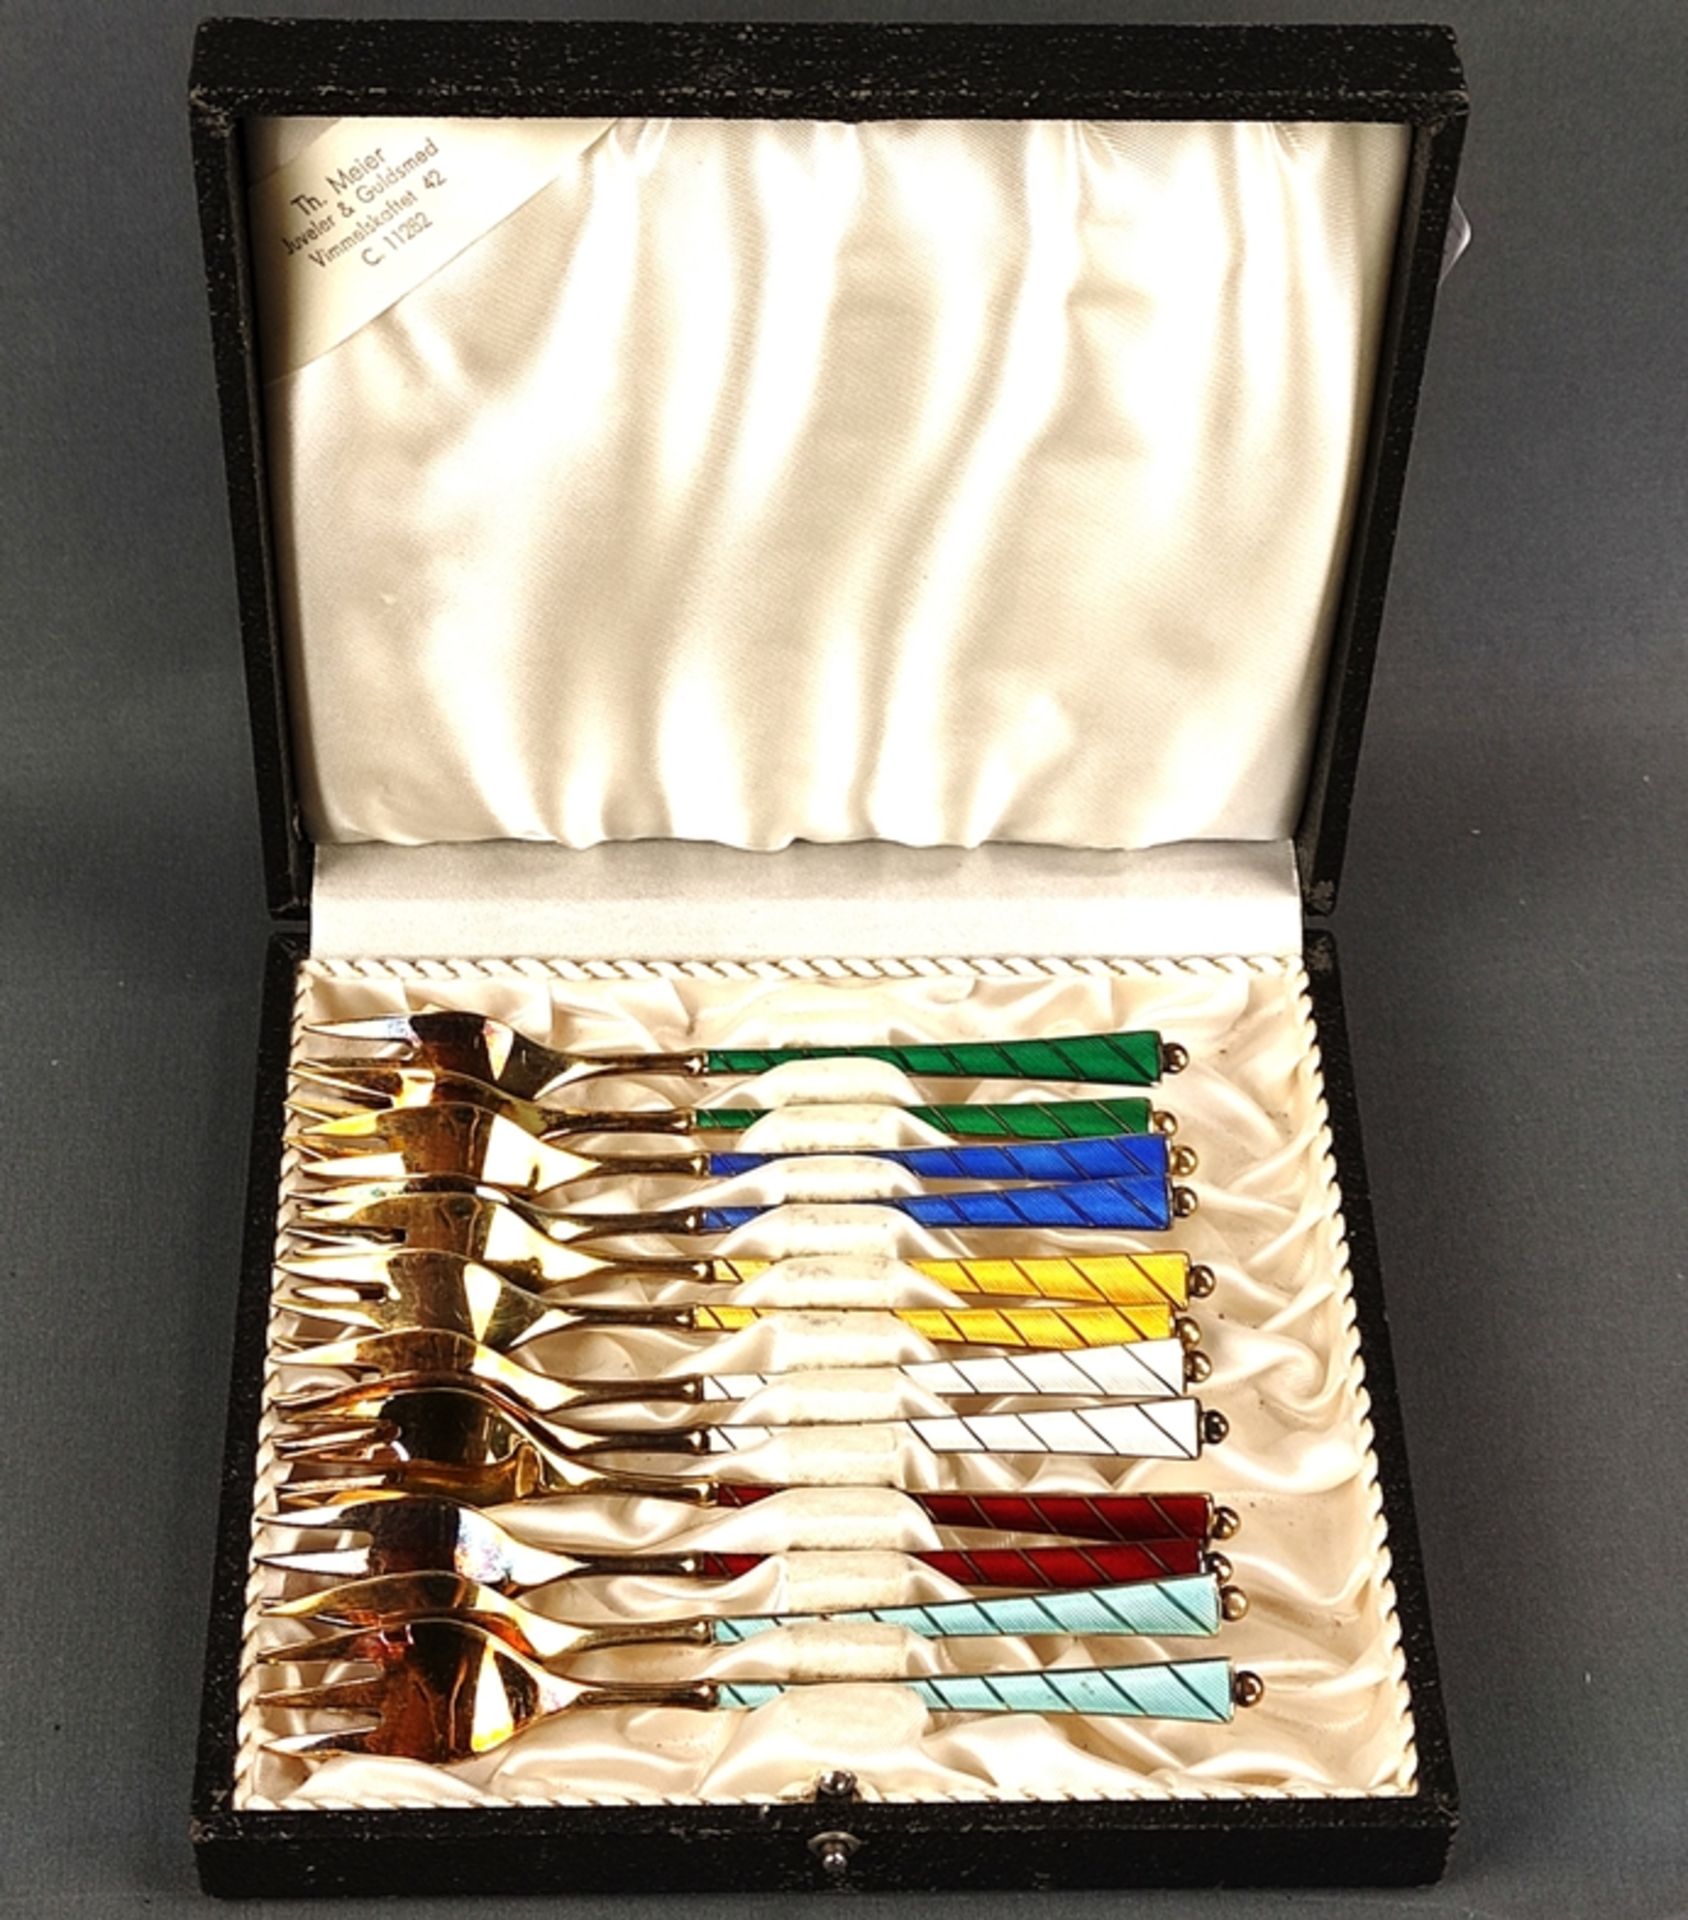 12 cake forks, sterling silver, 194g, Denmark, Egon Lauridsen, marked Ela, two each in the same col